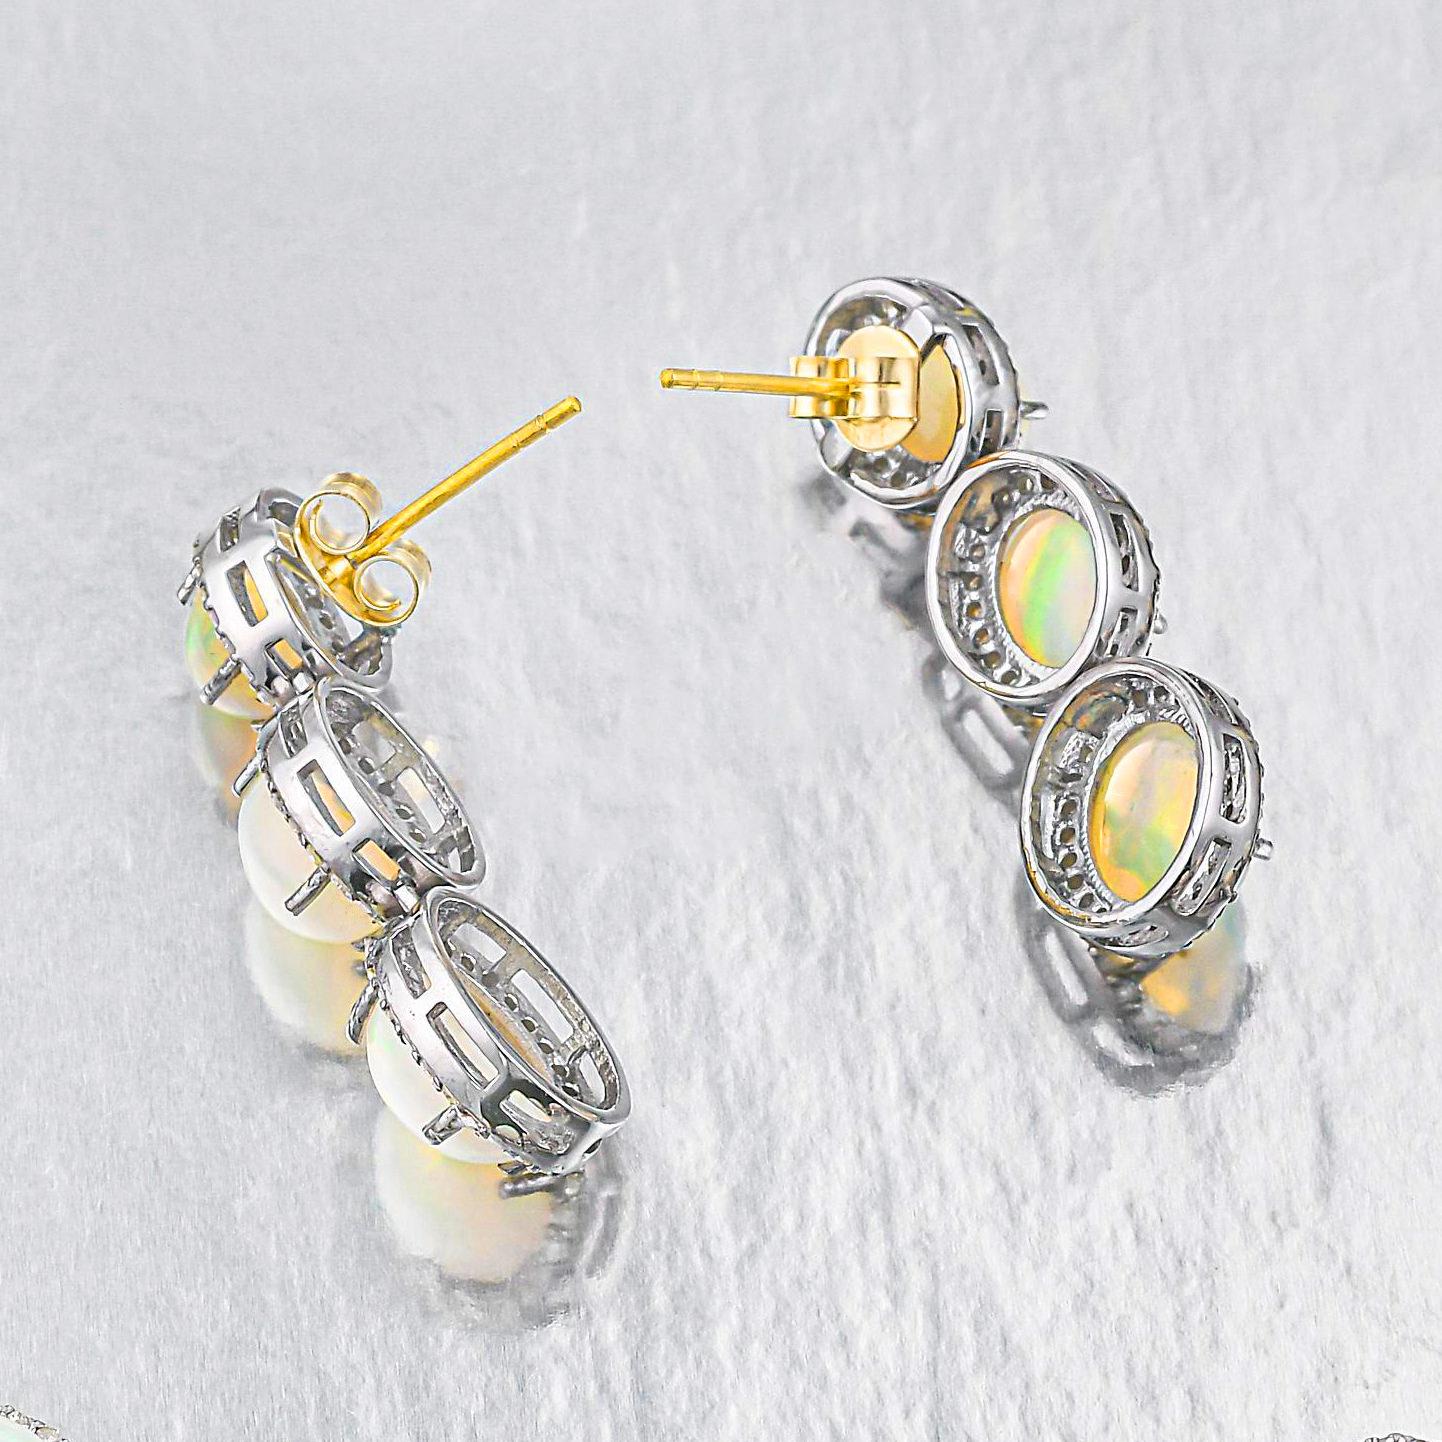 Cabochon Opal Earrings Set With Diamonds 9 Carats Total For Sale